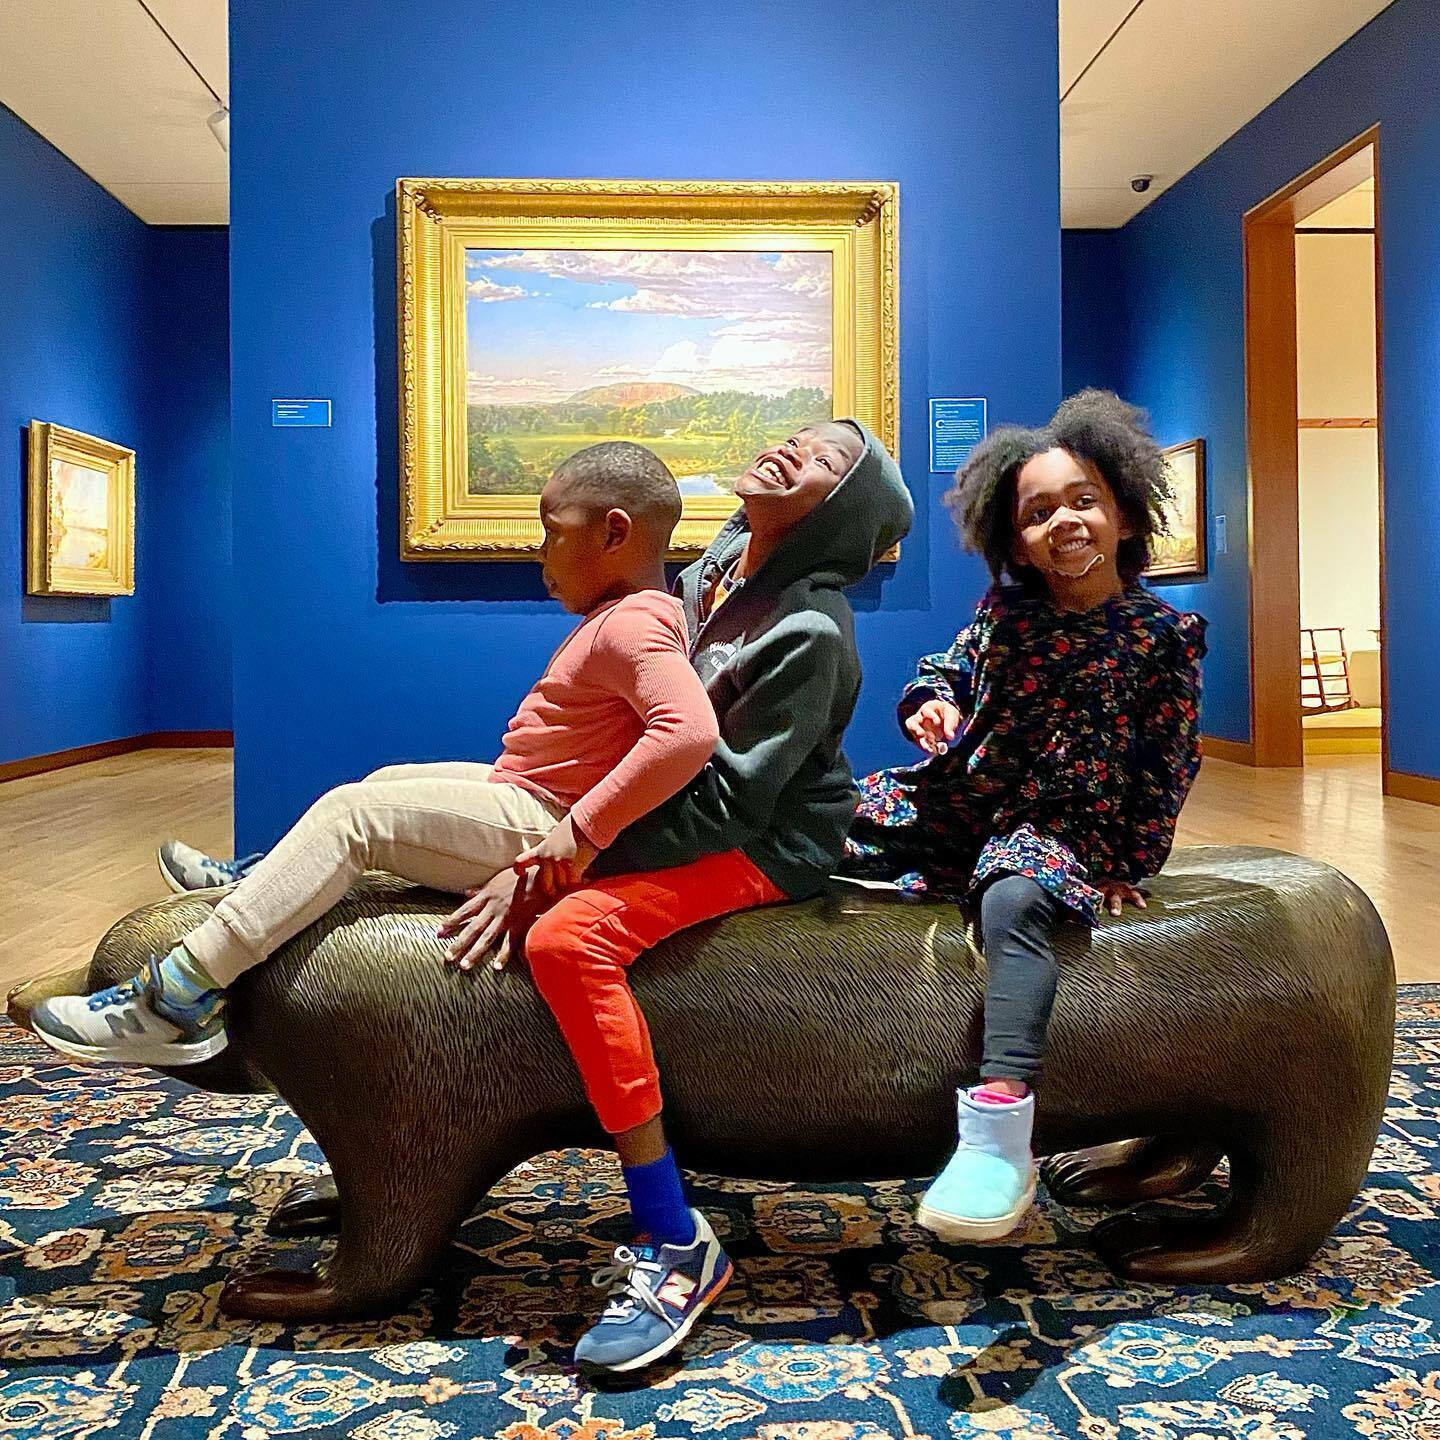 Spend a day at the Museum with your family